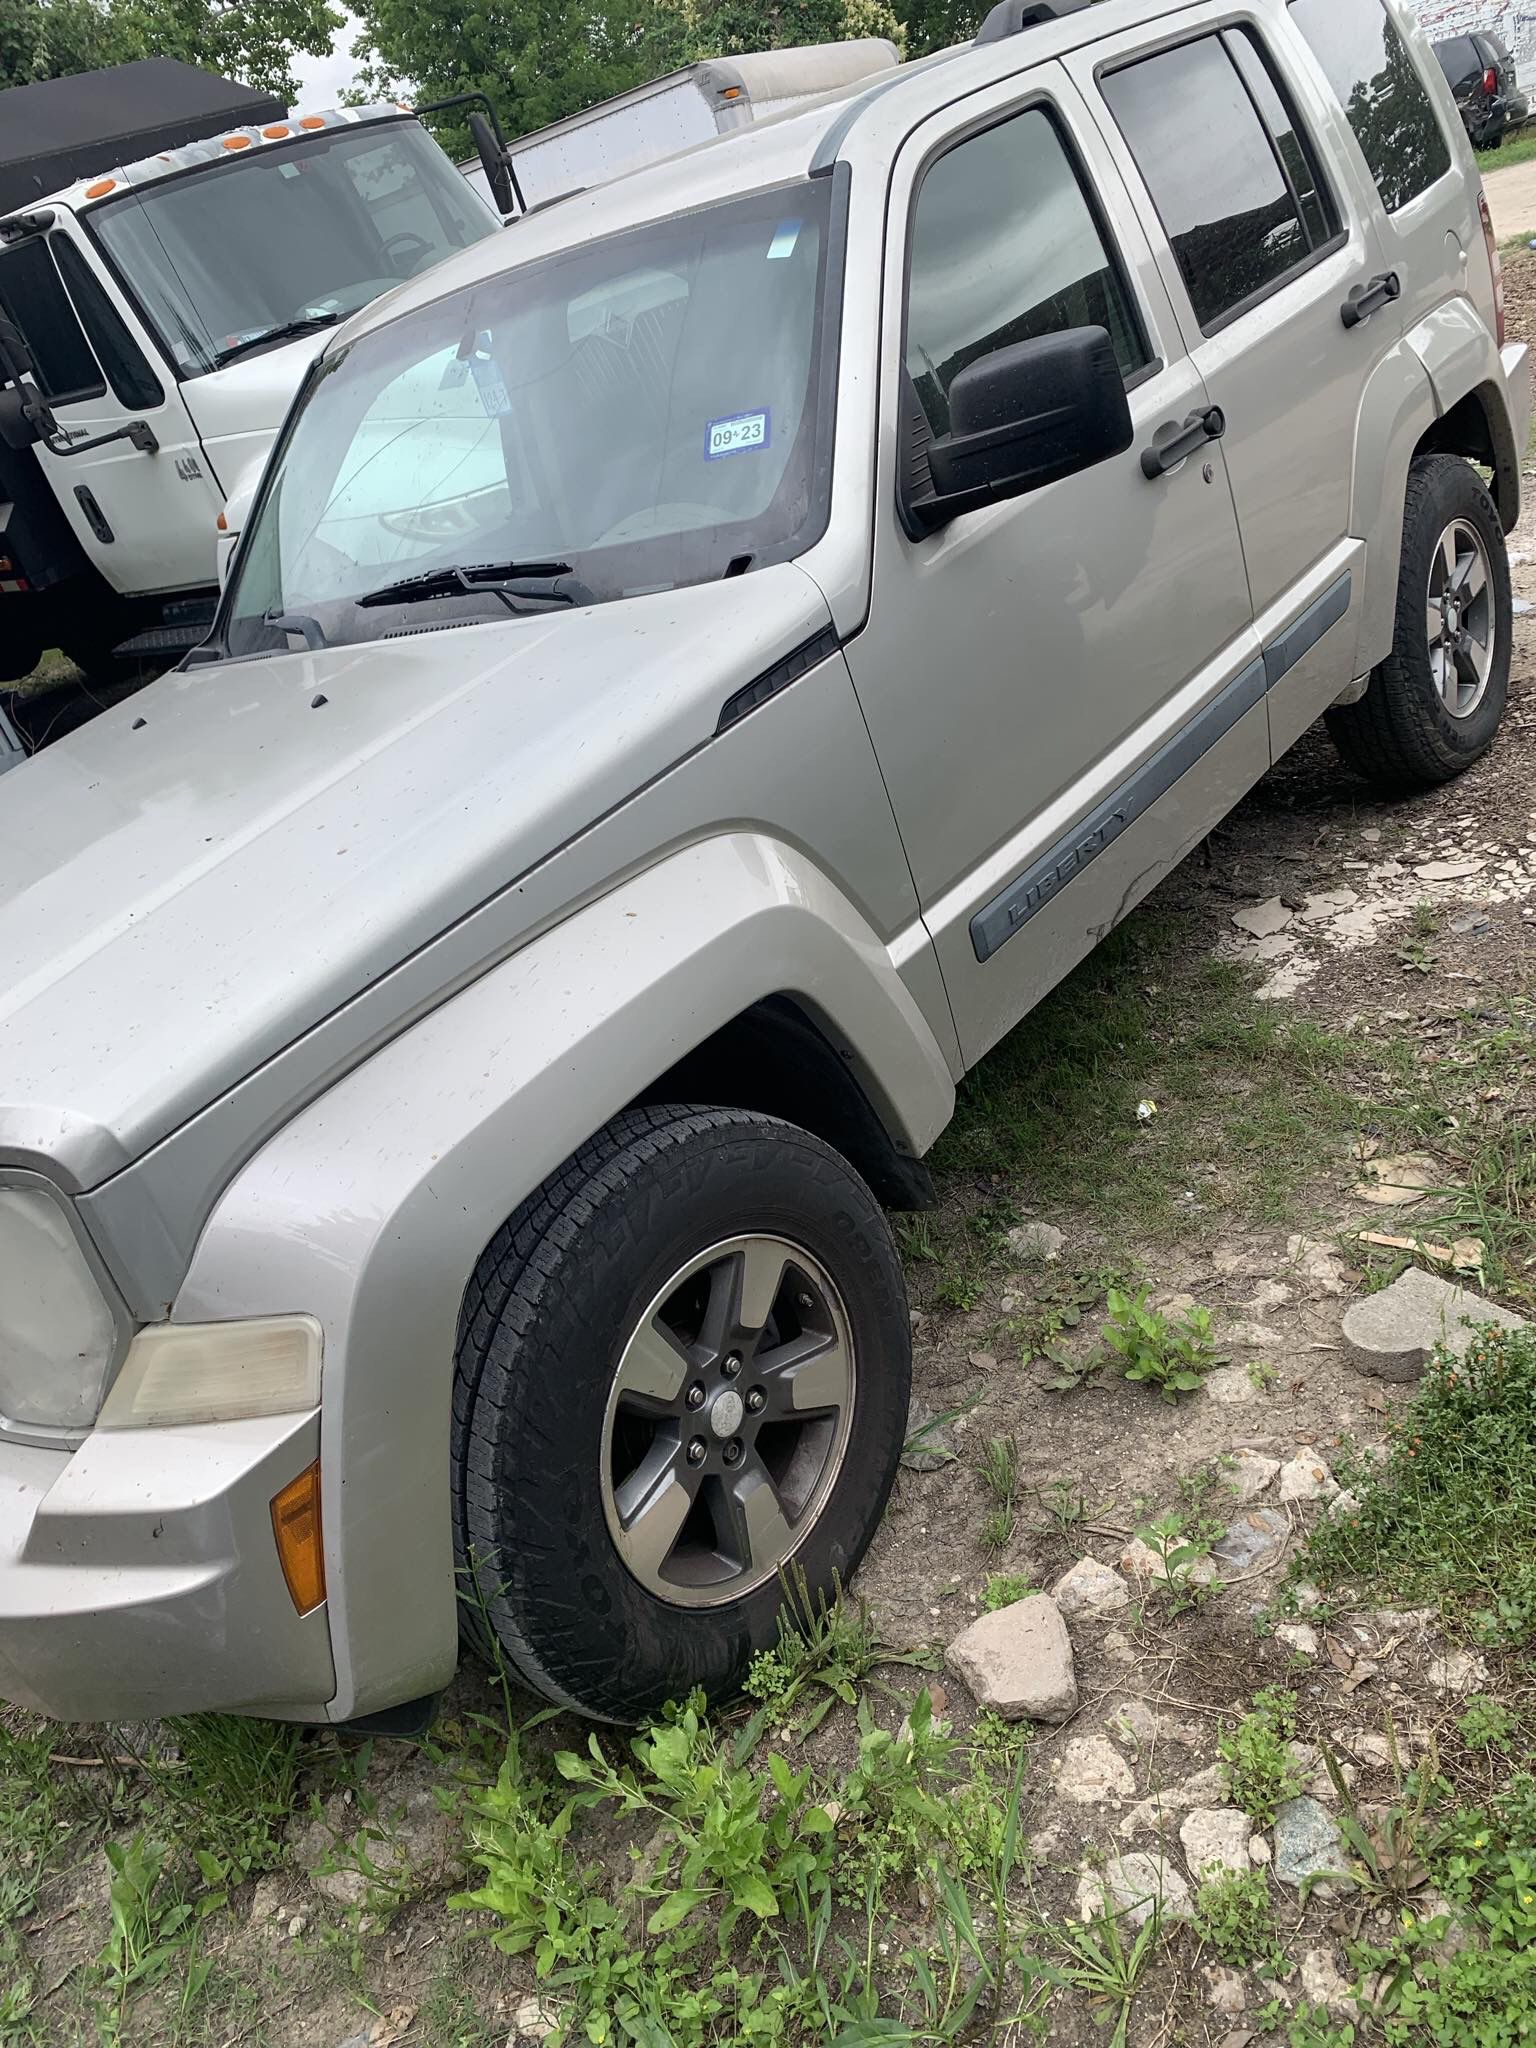 Jeep Liberty 2008 Part Out Or Complete 